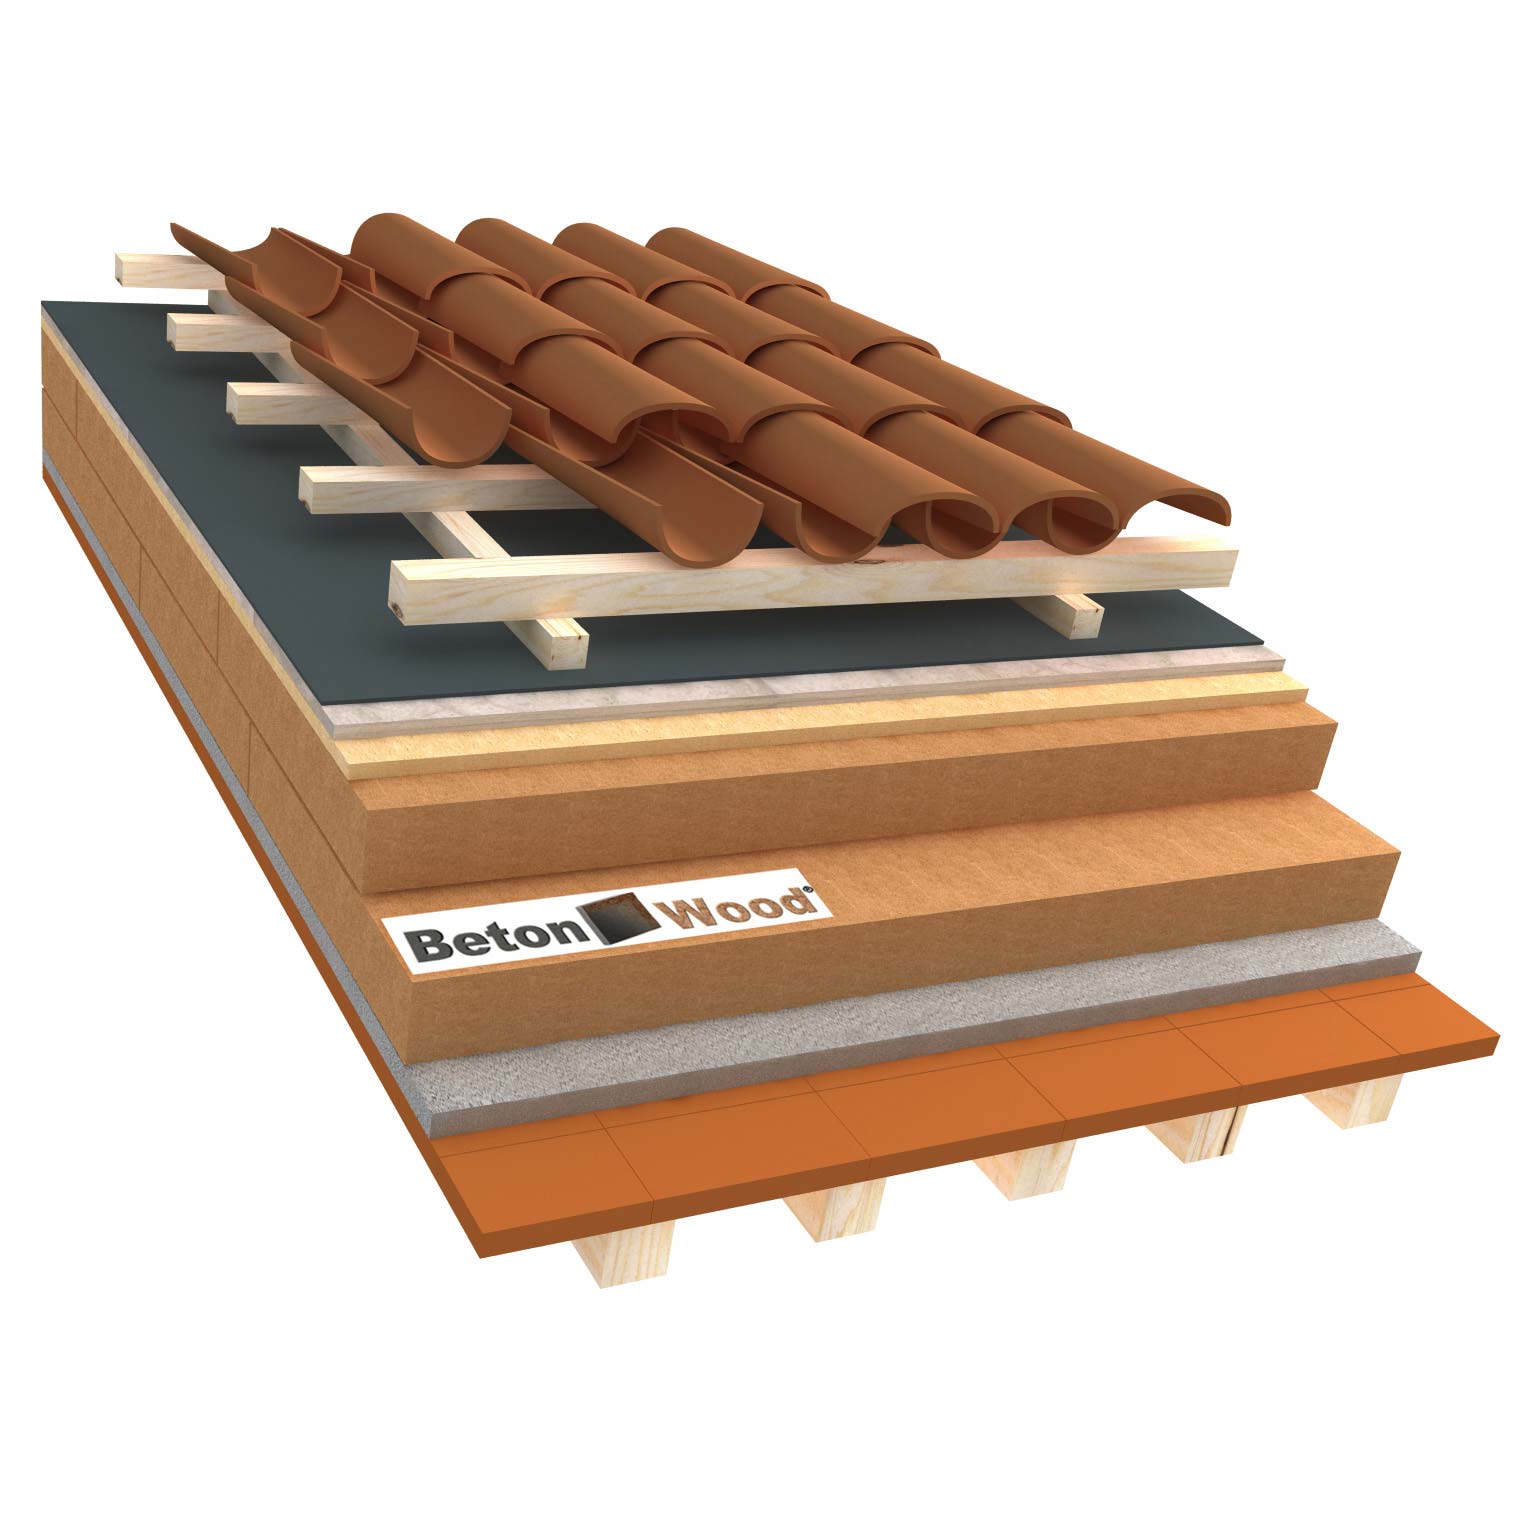 Ventilated roof with wood fiber Isorel, Therm and cement bonded particle boards on terracotta tiles